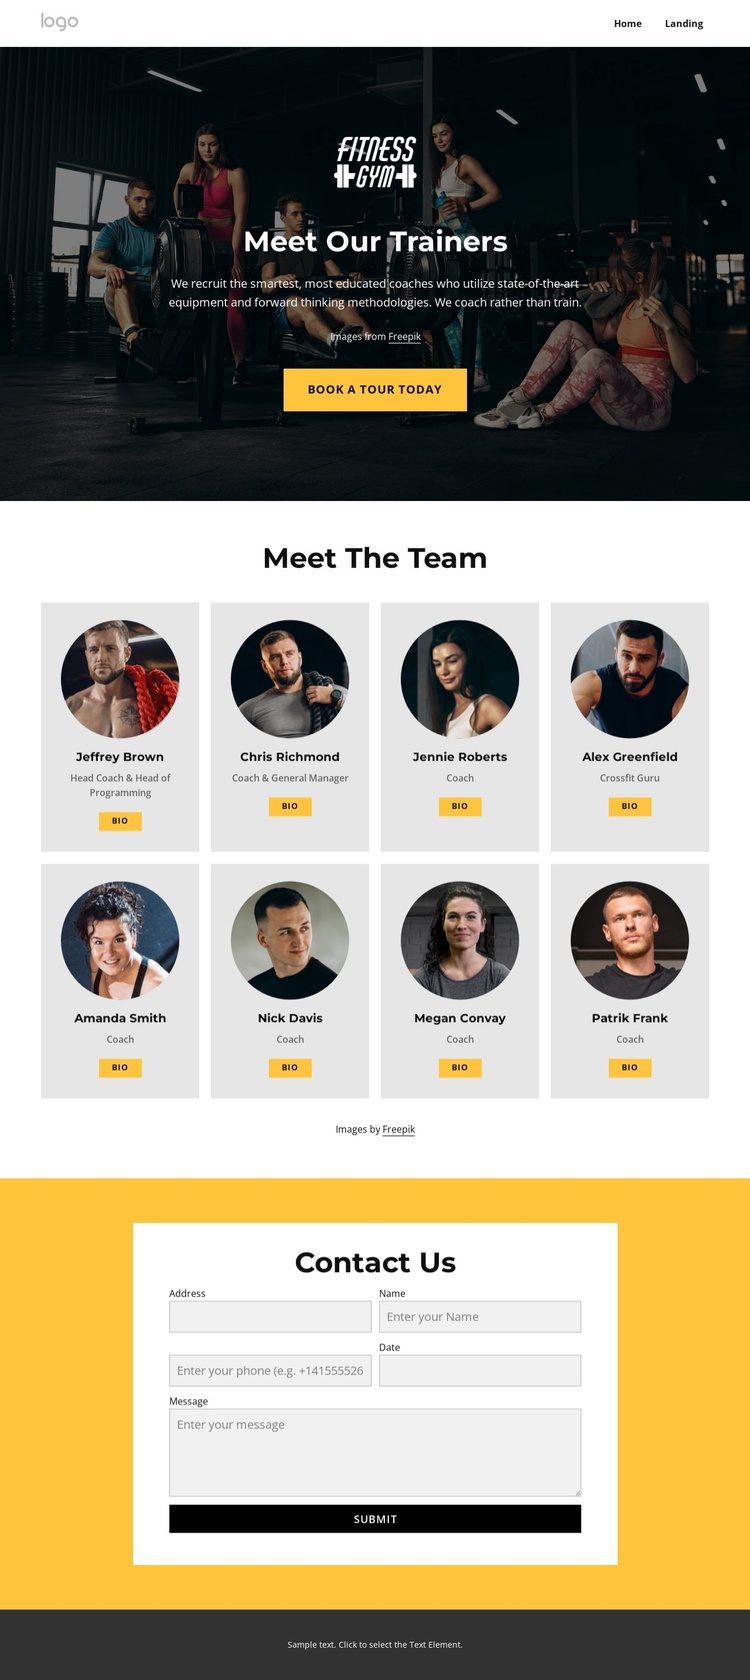 Meet our trainers Joomla Template